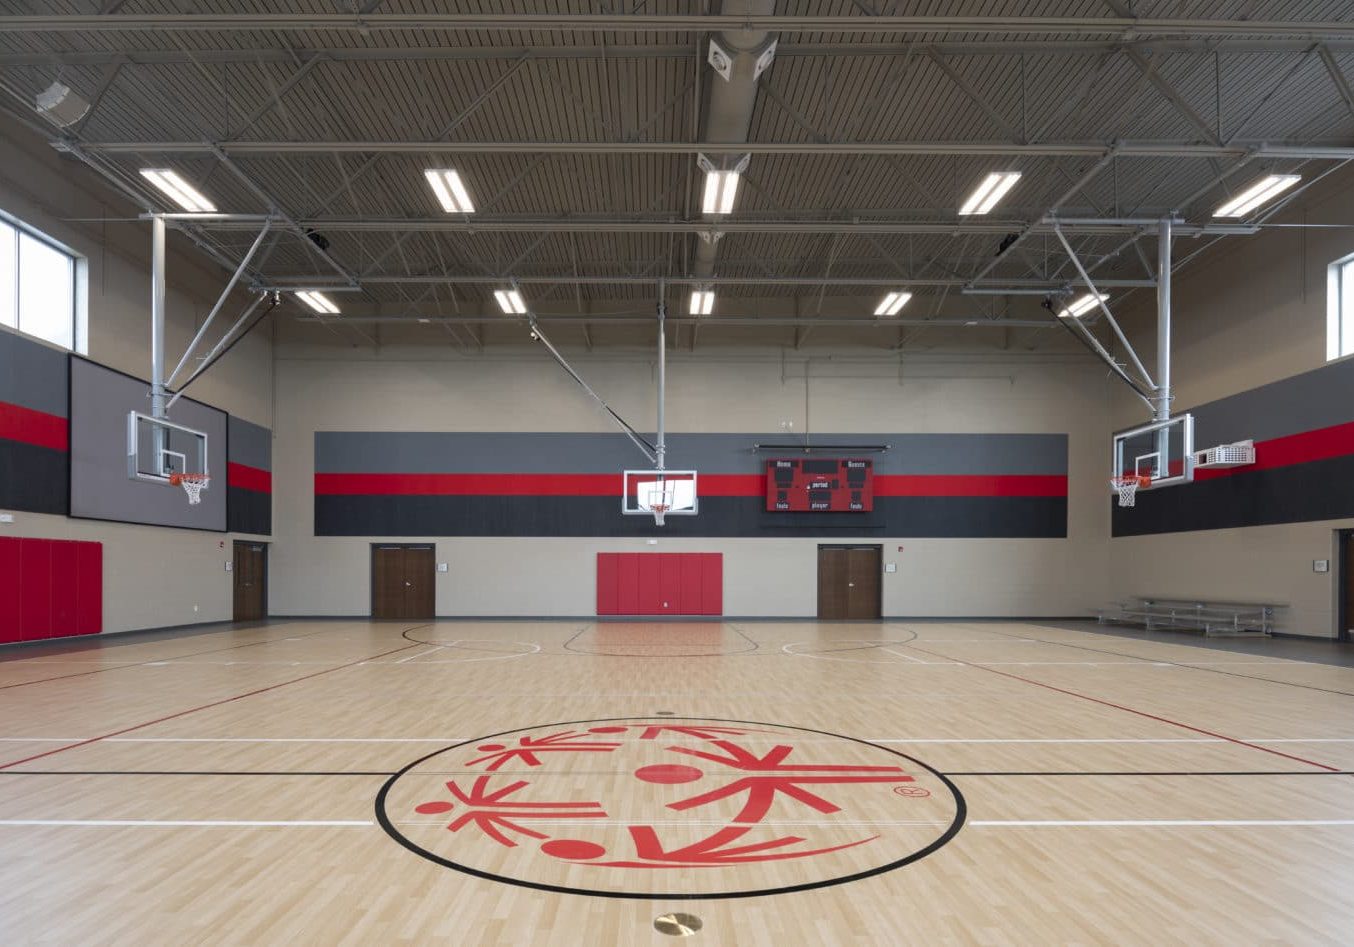 A gymnasium with three basketball hoops, a scoreboard, and a SOMO logo at center court